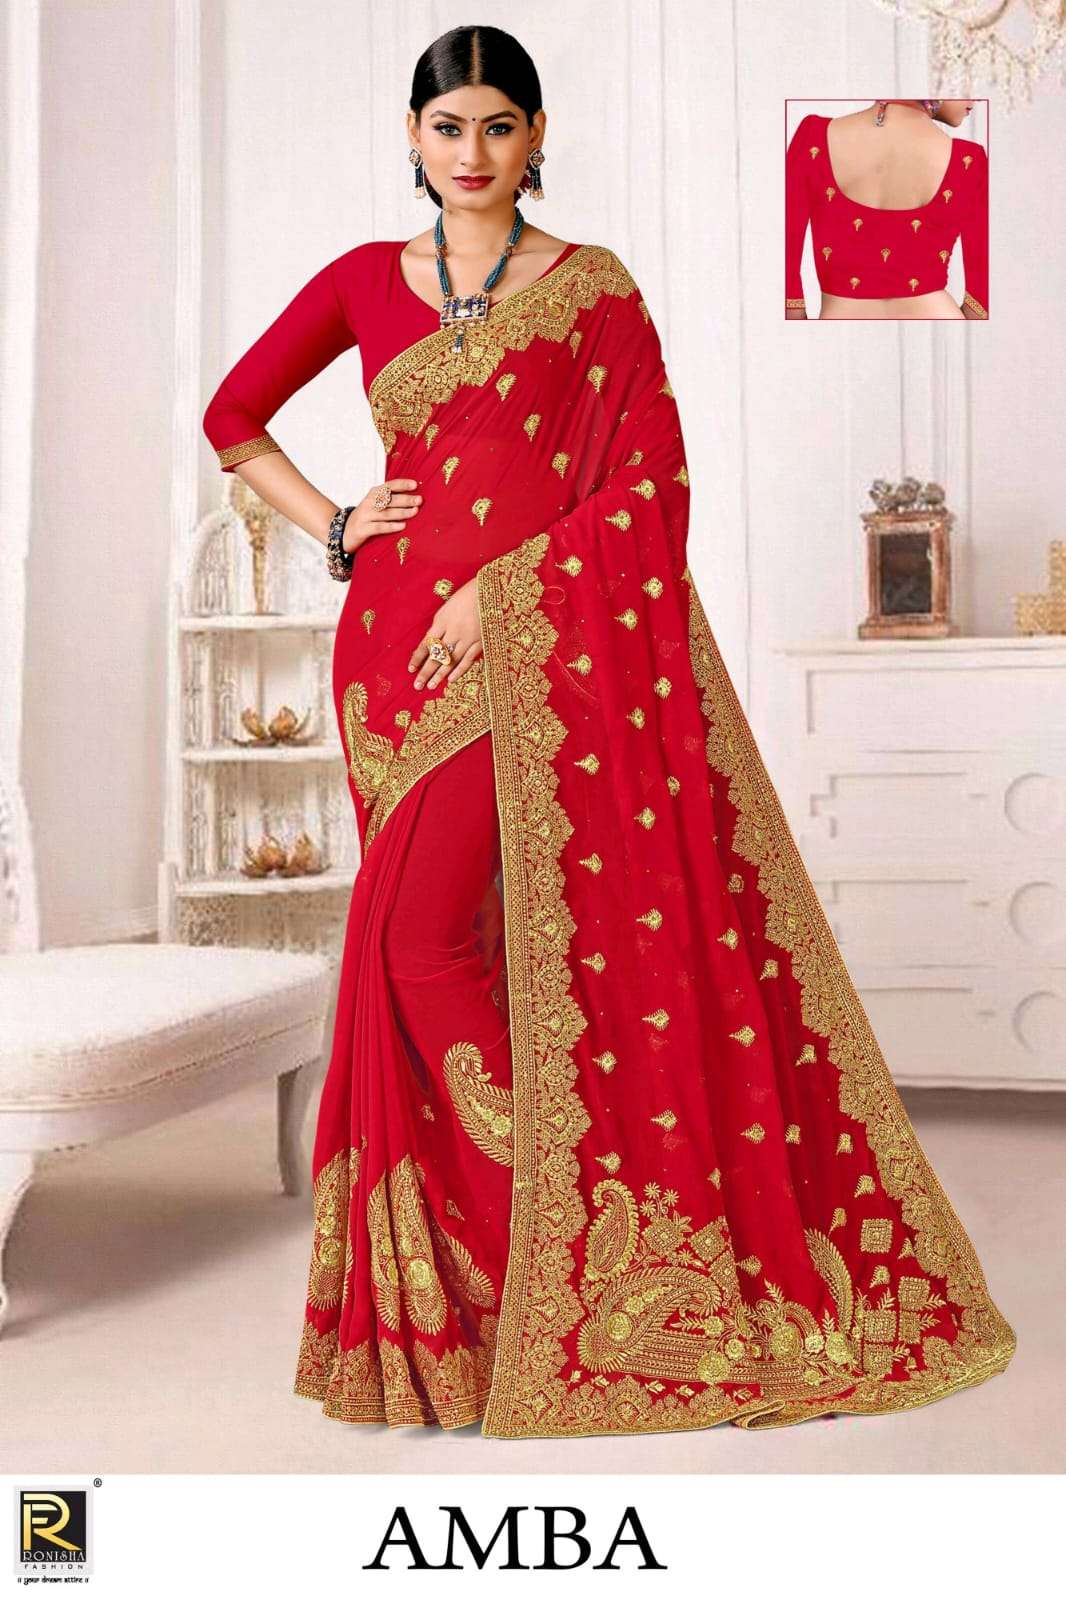 Amba by ranjna saree embroidery worked wedding collection 